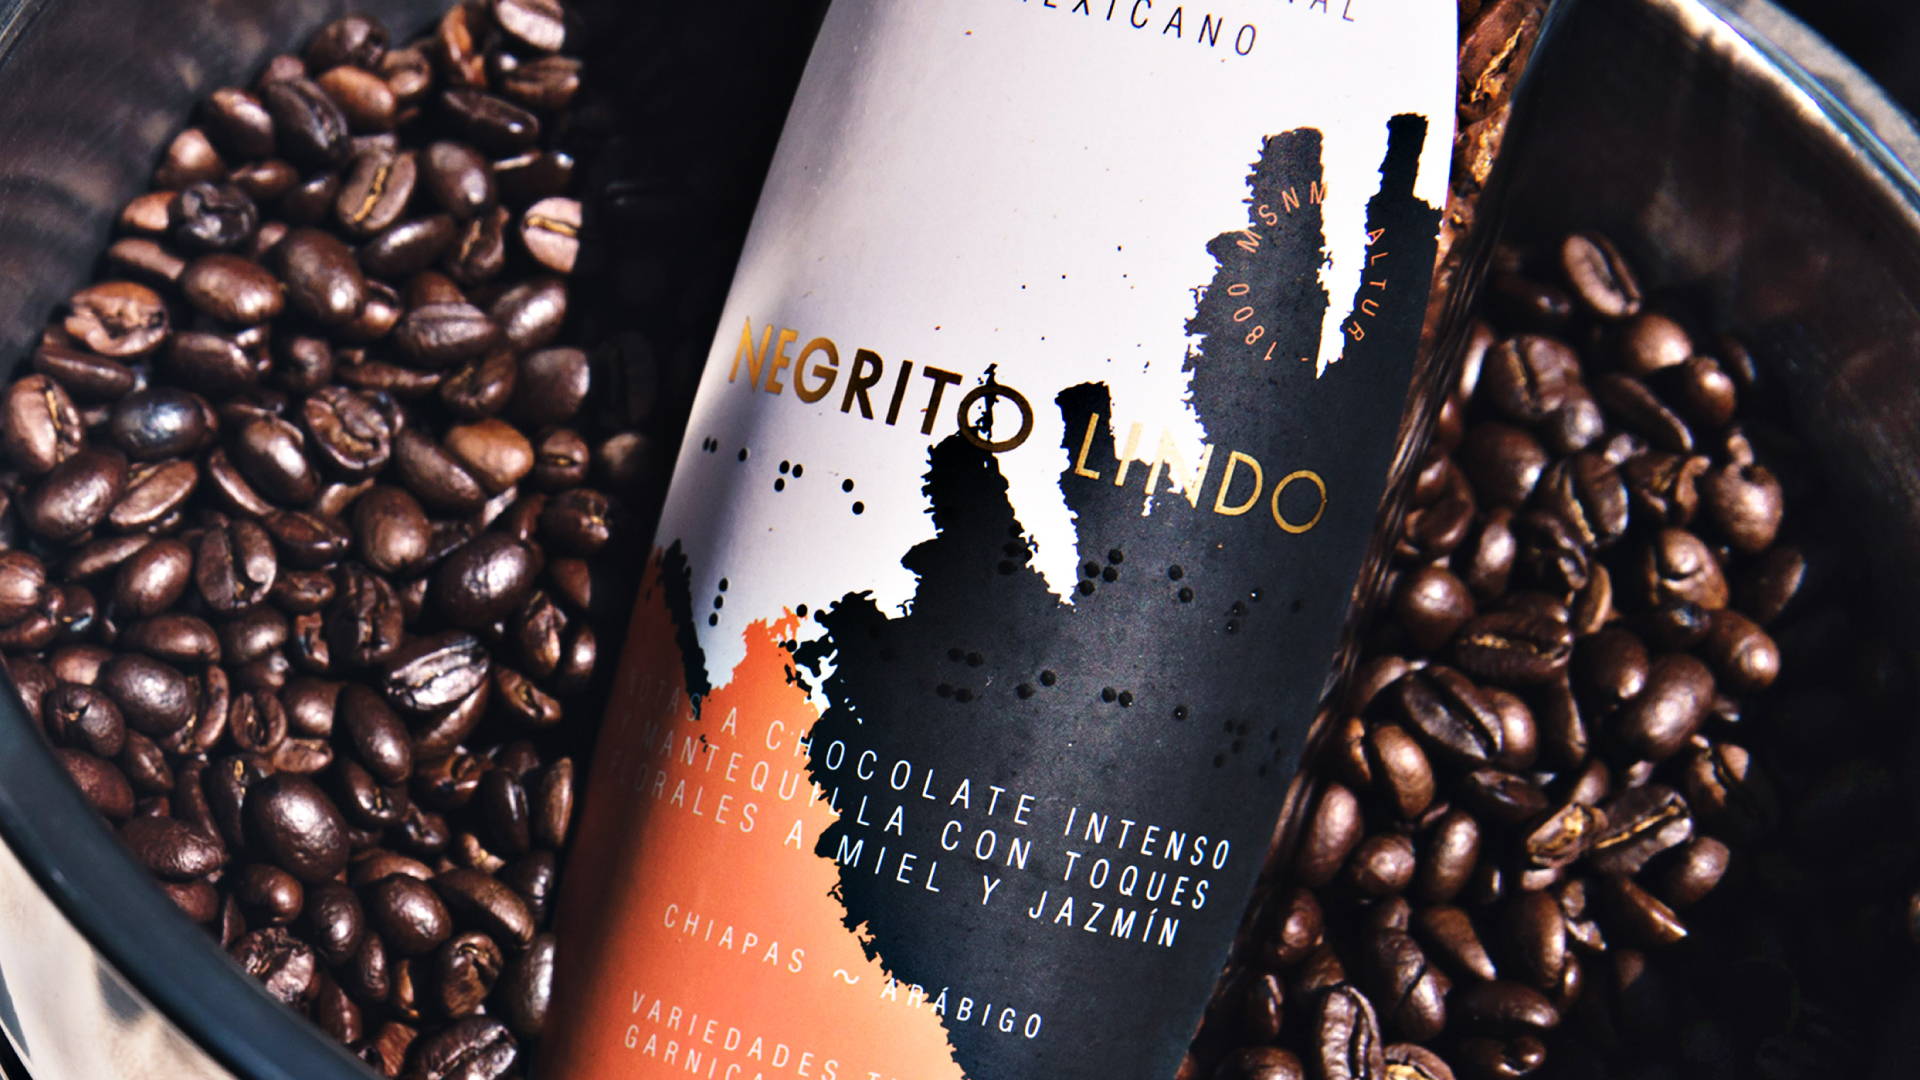 Featured image for Captivate All Five Of Your Senses With Negrito Lindo's Coffee Packaging